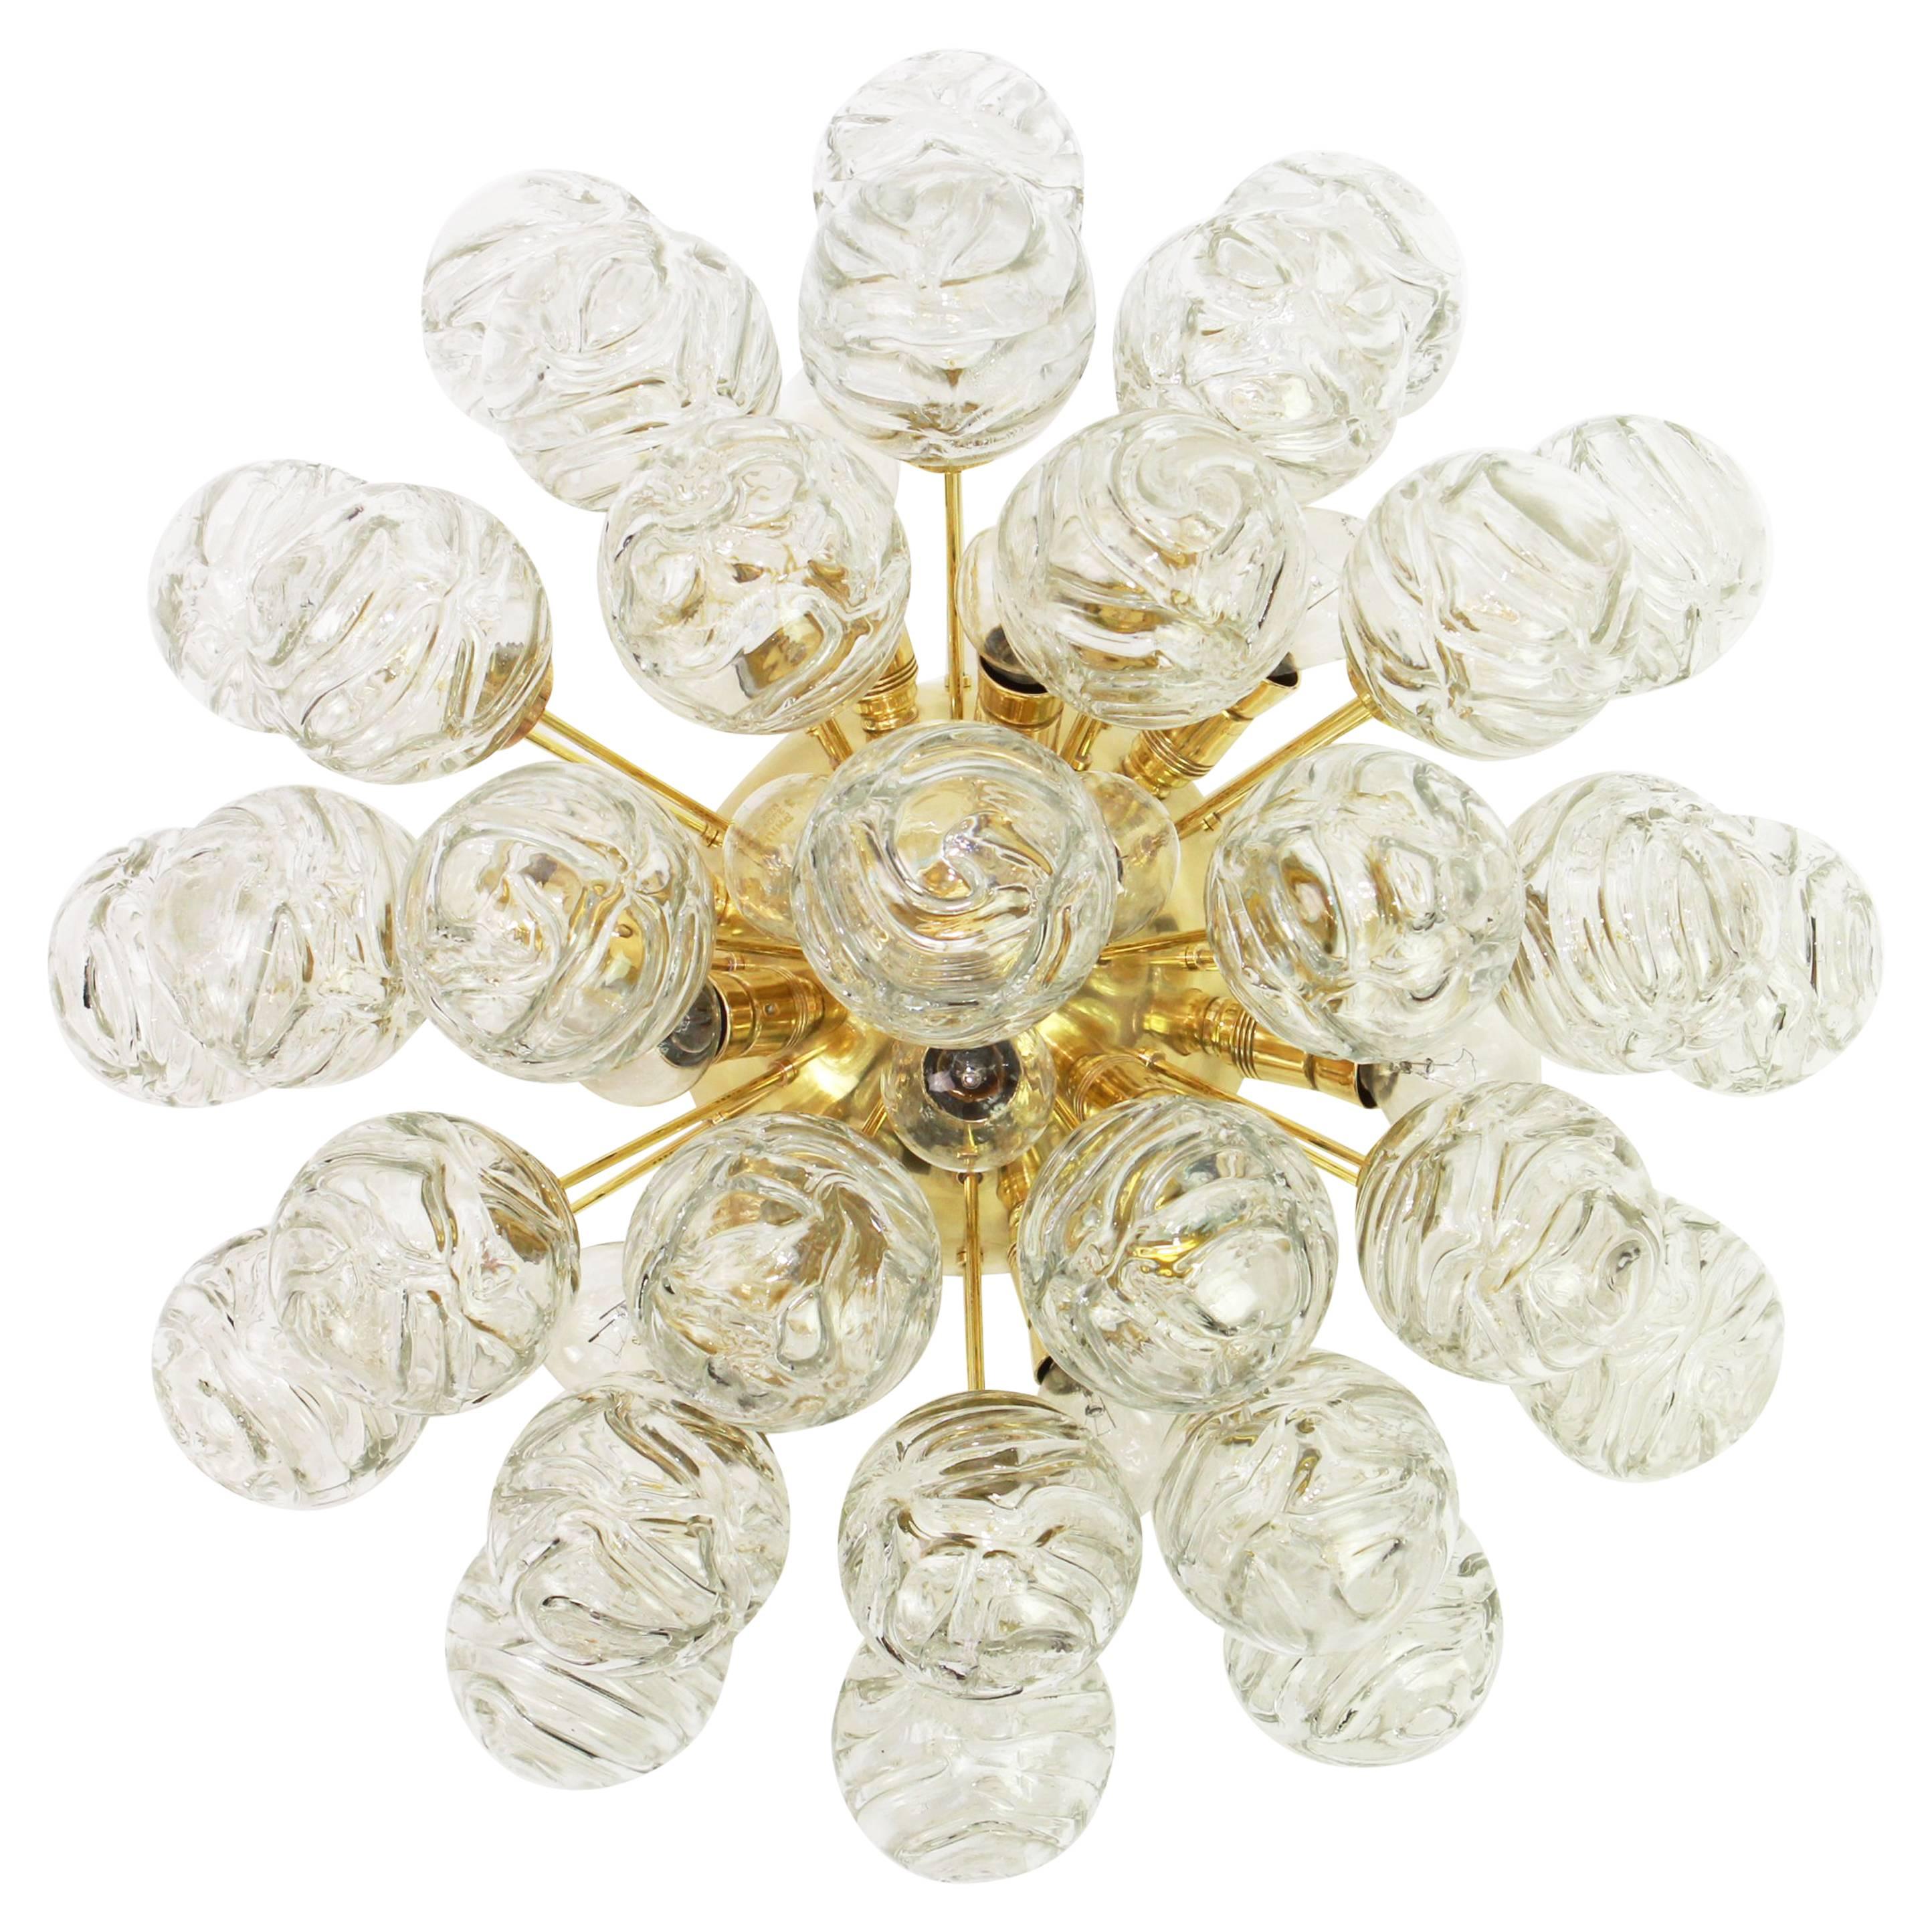 Spectacular Sputnik flush mount with glass snowballs designed by Doria, Germany, 1970s.
All glass balls are in good condition.
It needs 12 small size bulbs (E-14 bulbs) up to 40 watts each and is compatible with the US /UK/ .. Standards.

2